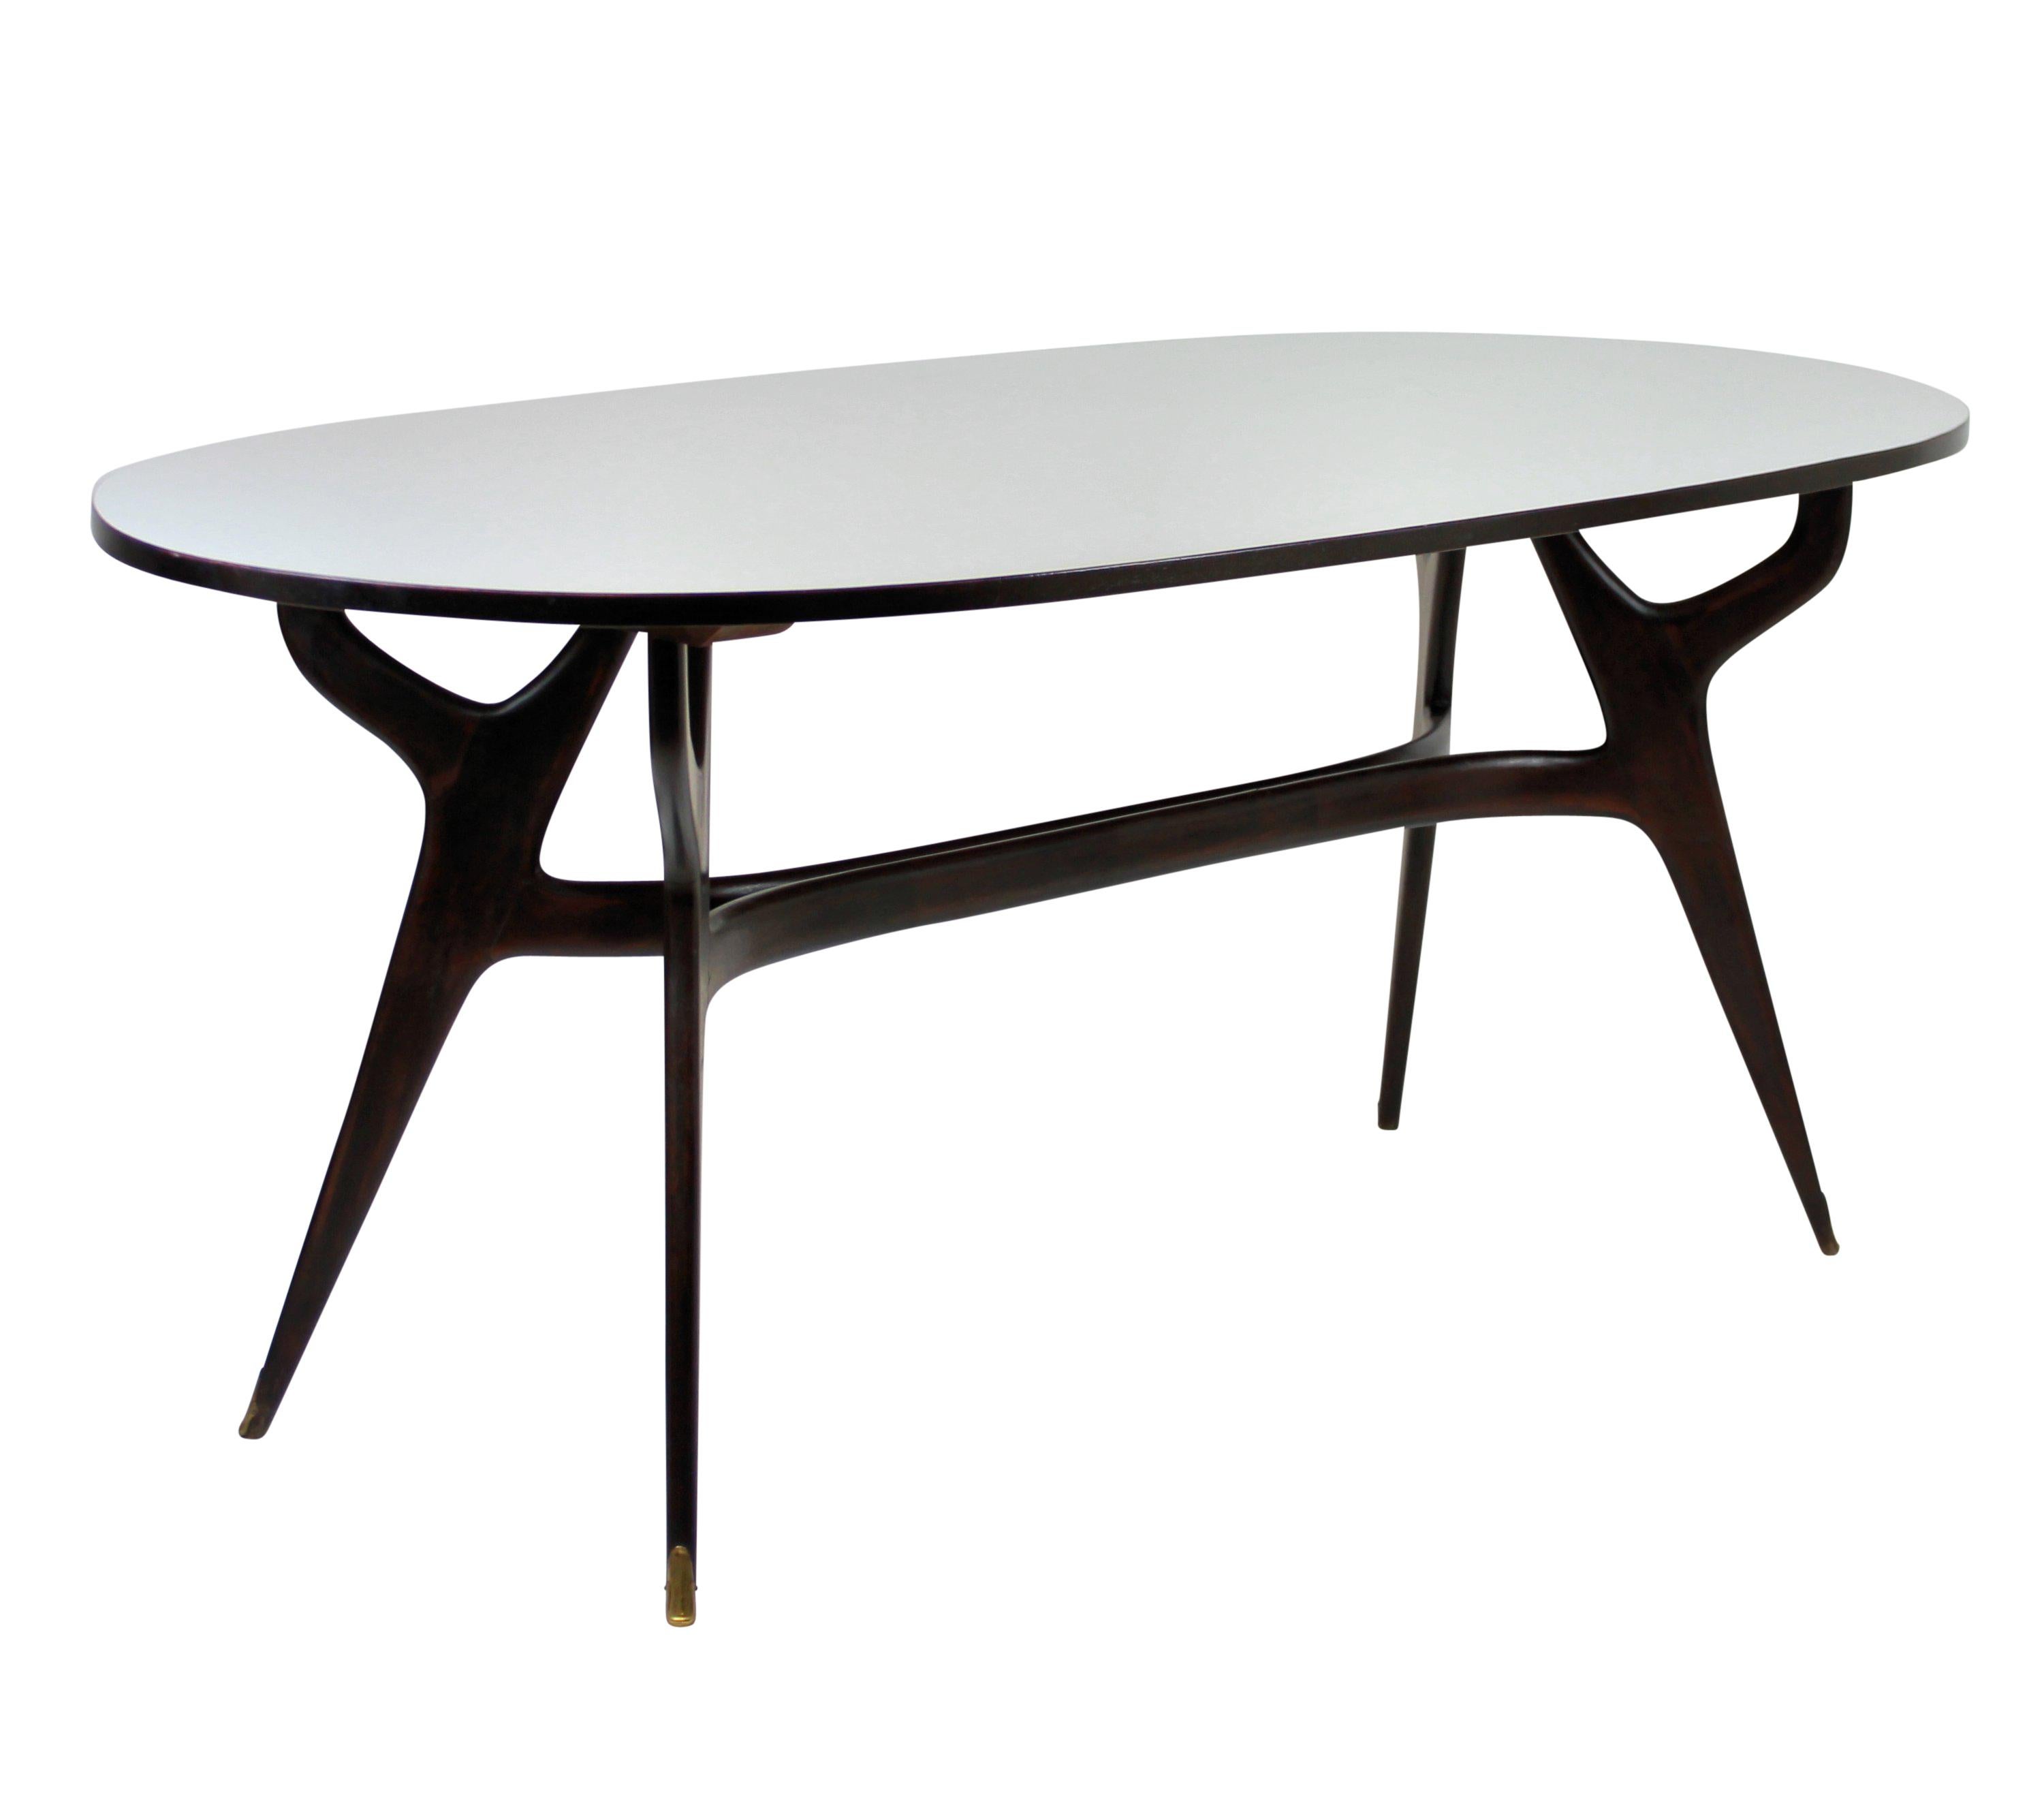 Italian Sculptural Dining Table by Ico Parisi